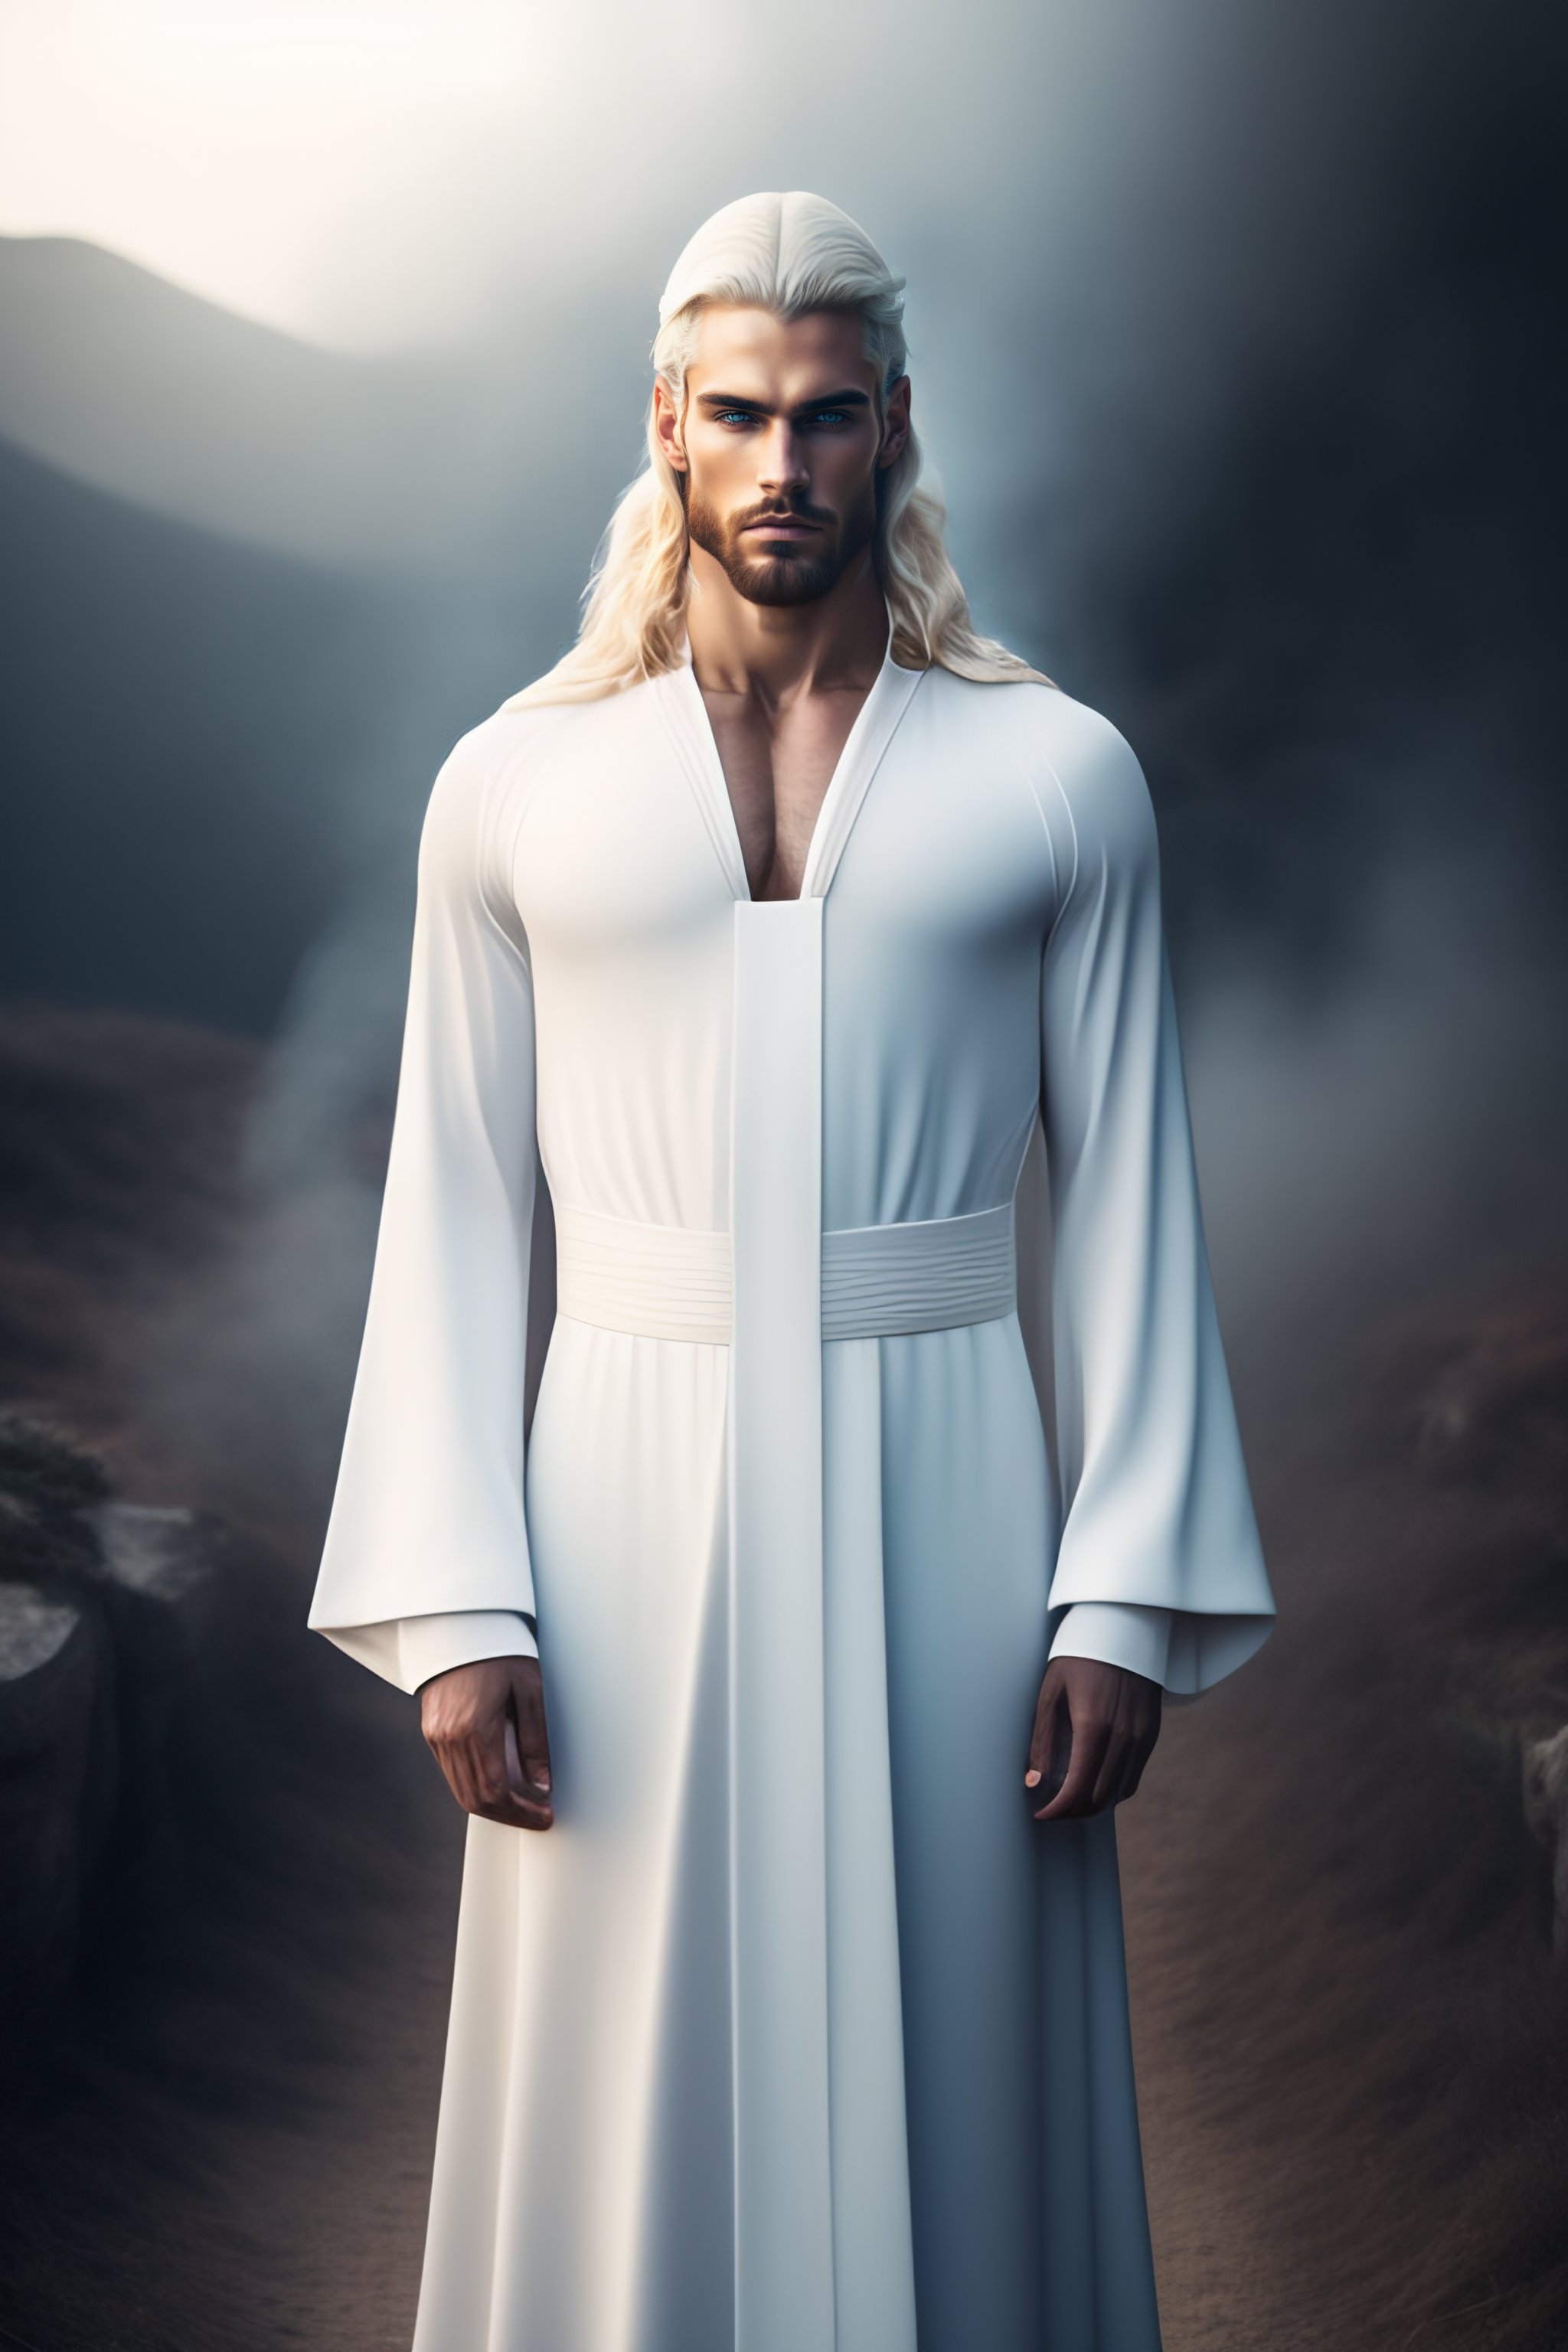 Lexica - Jesus Christ, realistic photography, dressed, man, suffering ...